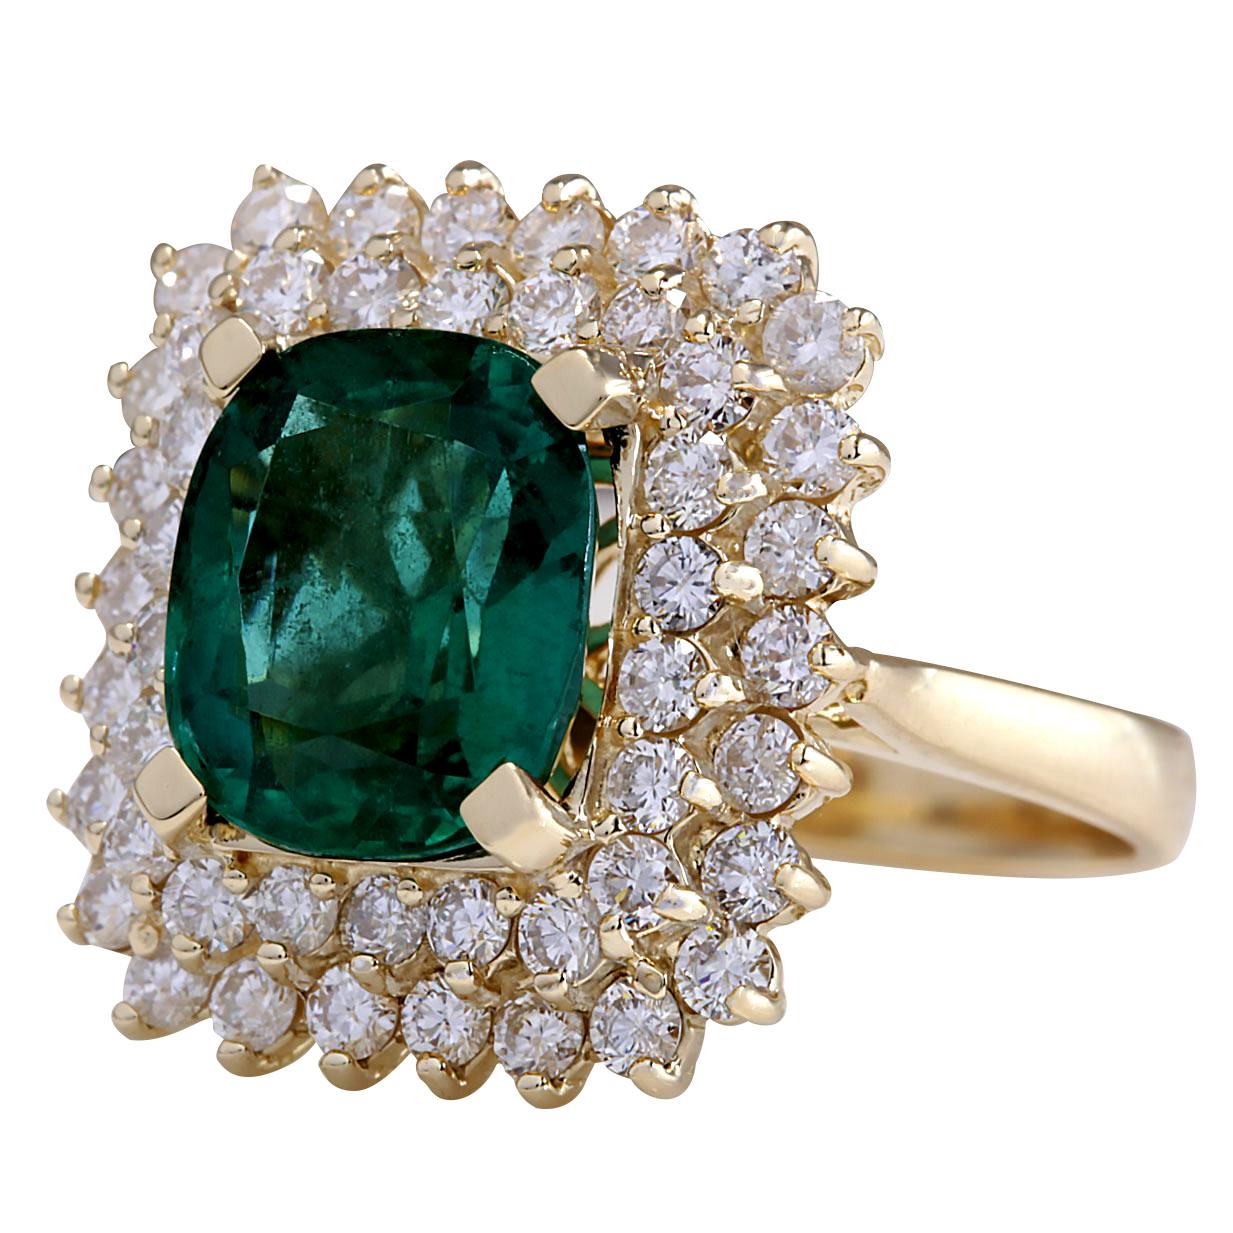 Stamped: 14K Yellow Gold
Total Ring Weight: 7.0 Grams
Total Natural Emerald Weight is 3.87 Carat (Measures: 10.00x8.00 mm)
Color: Green
Total Natural Diamond Weight is 1.40 Carat
Color: F-G, Clarity: VS2-SI1
Face Measures: 18.55x16.85 mm
Sku: